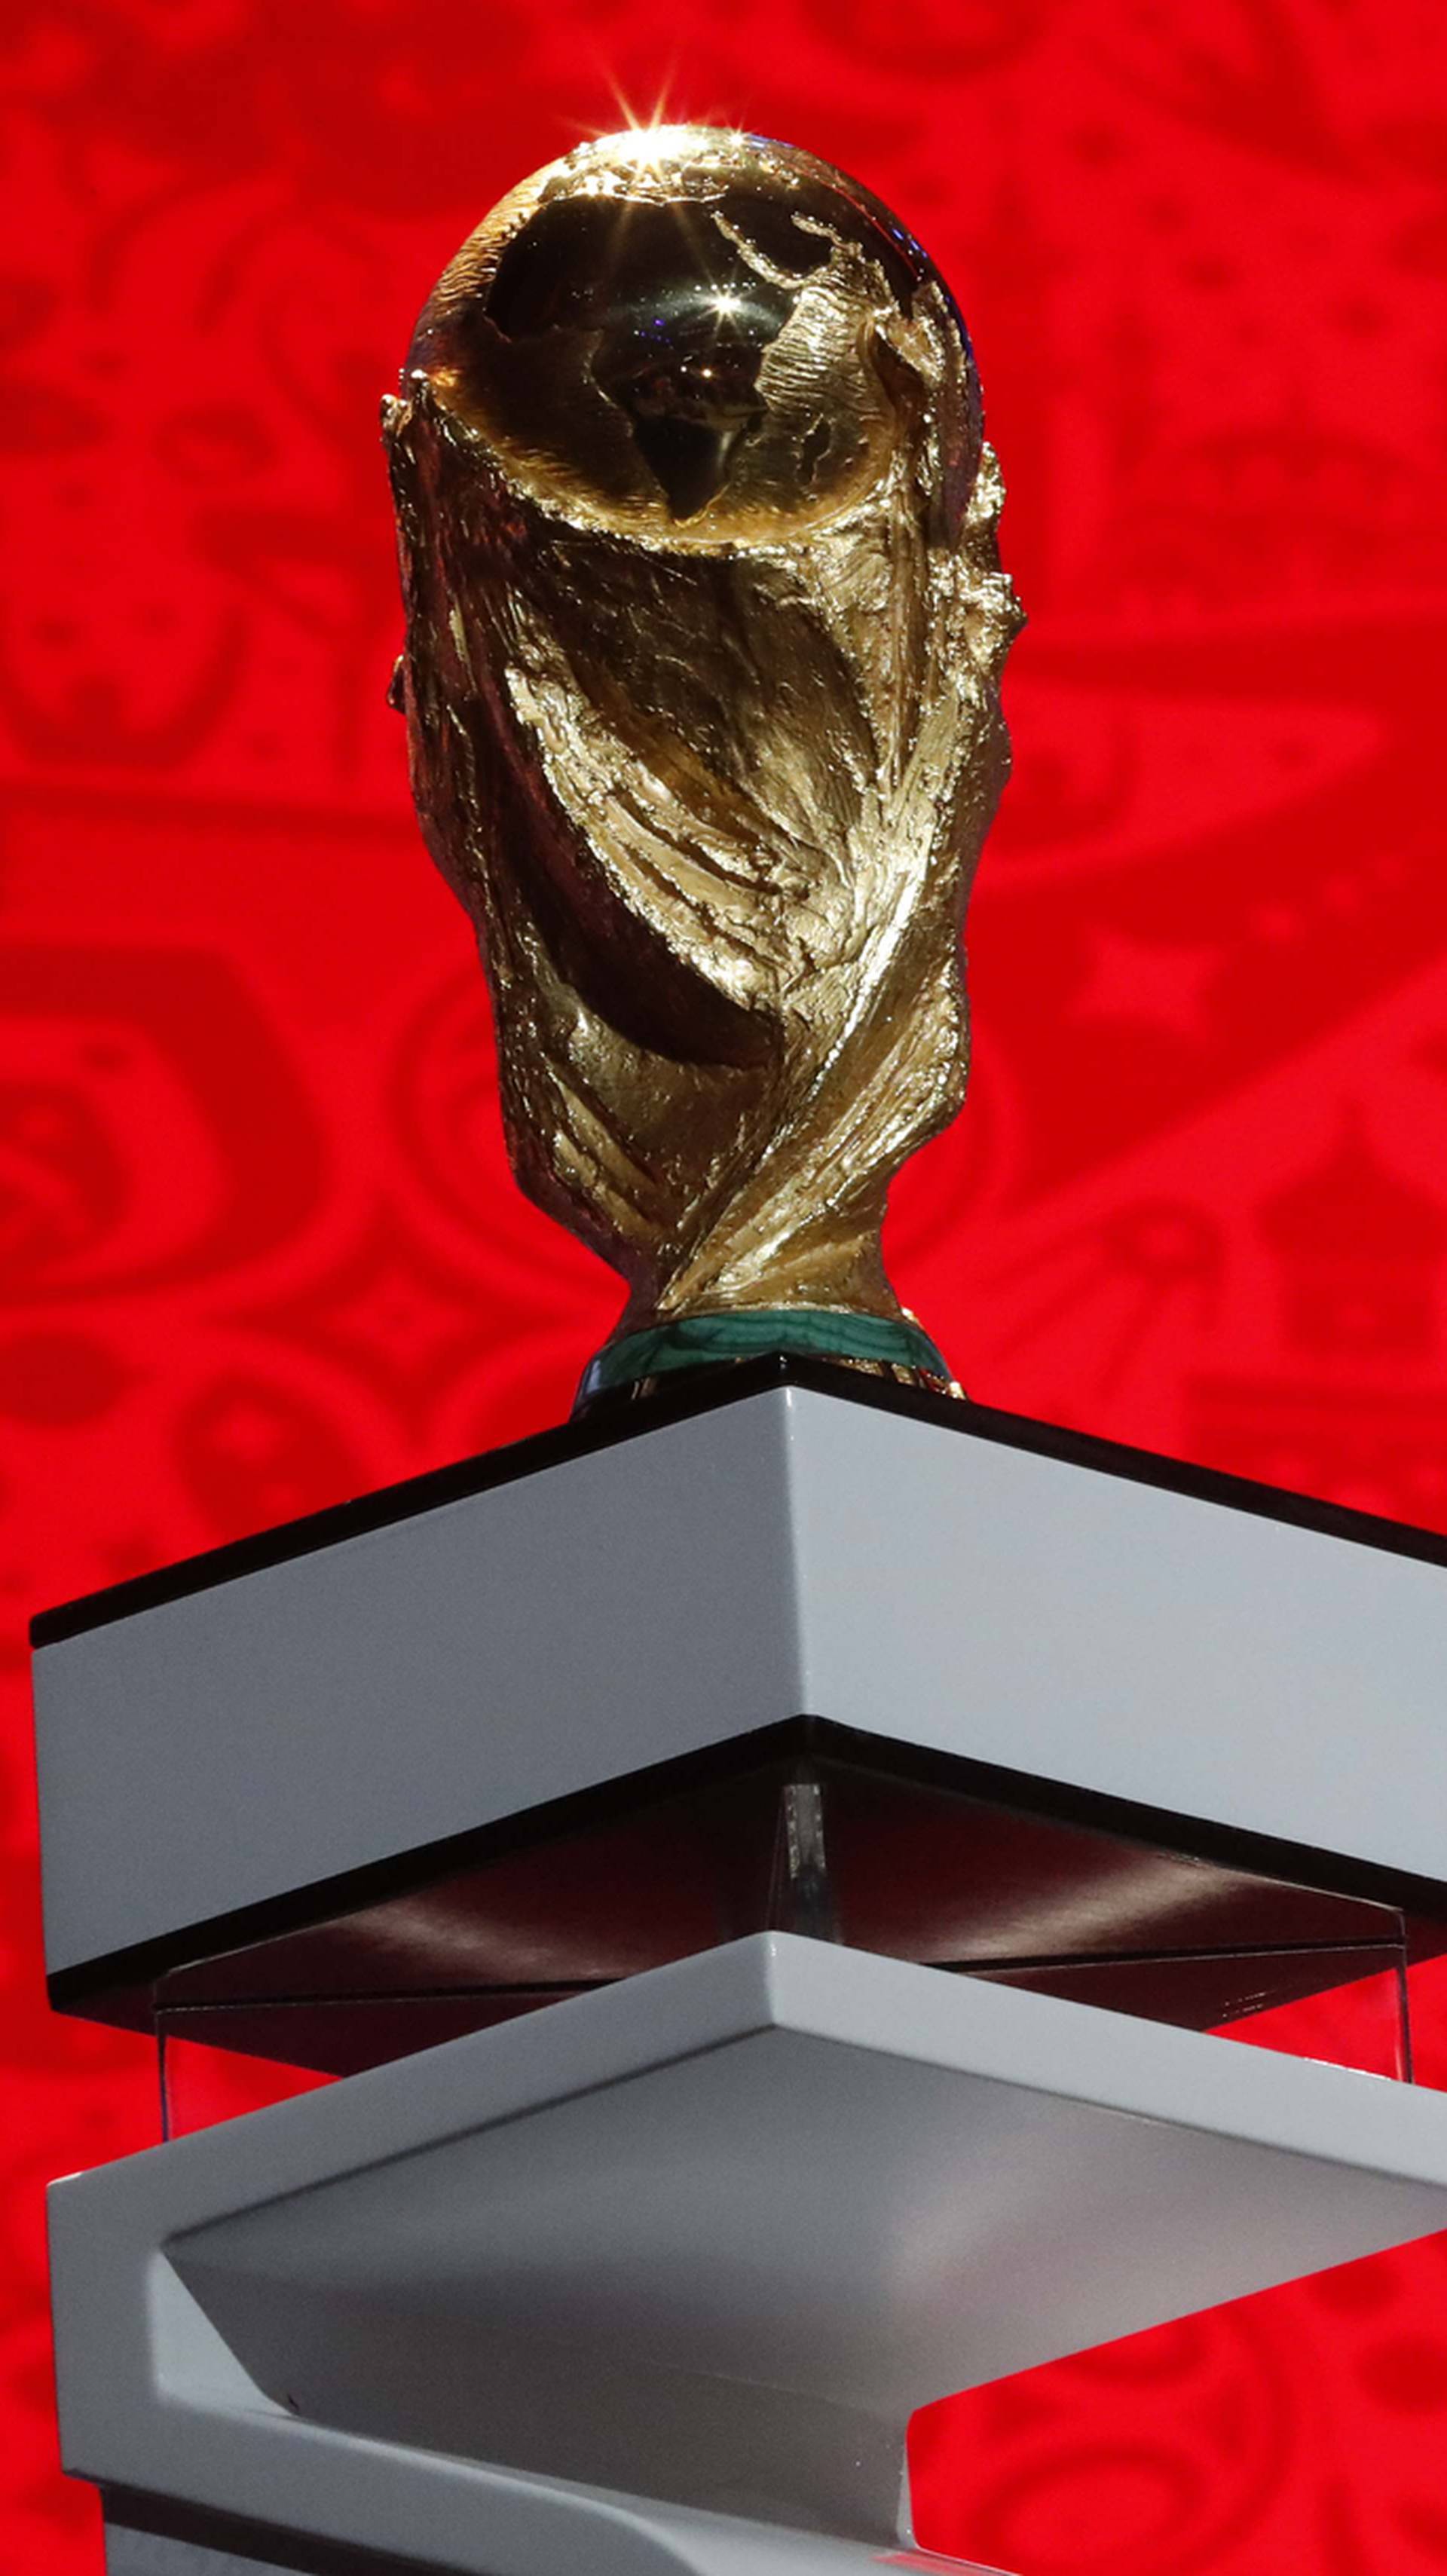 The World Cup trophy is on display during preparations for the upcoming Final Draw of the 2018 FIFA World Cup Russia in Moscow